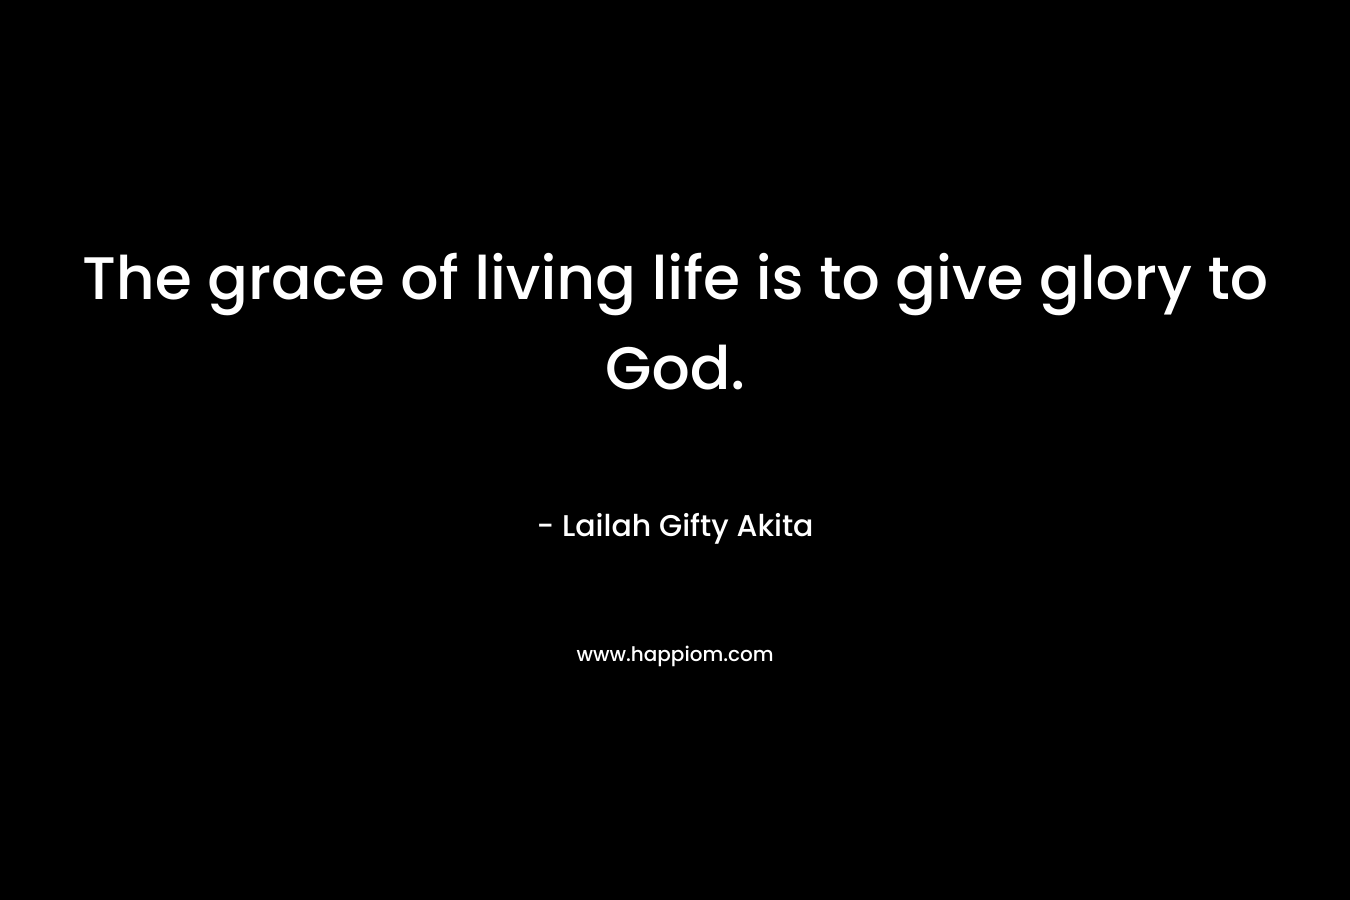 The grace of living life is to give glory to God.